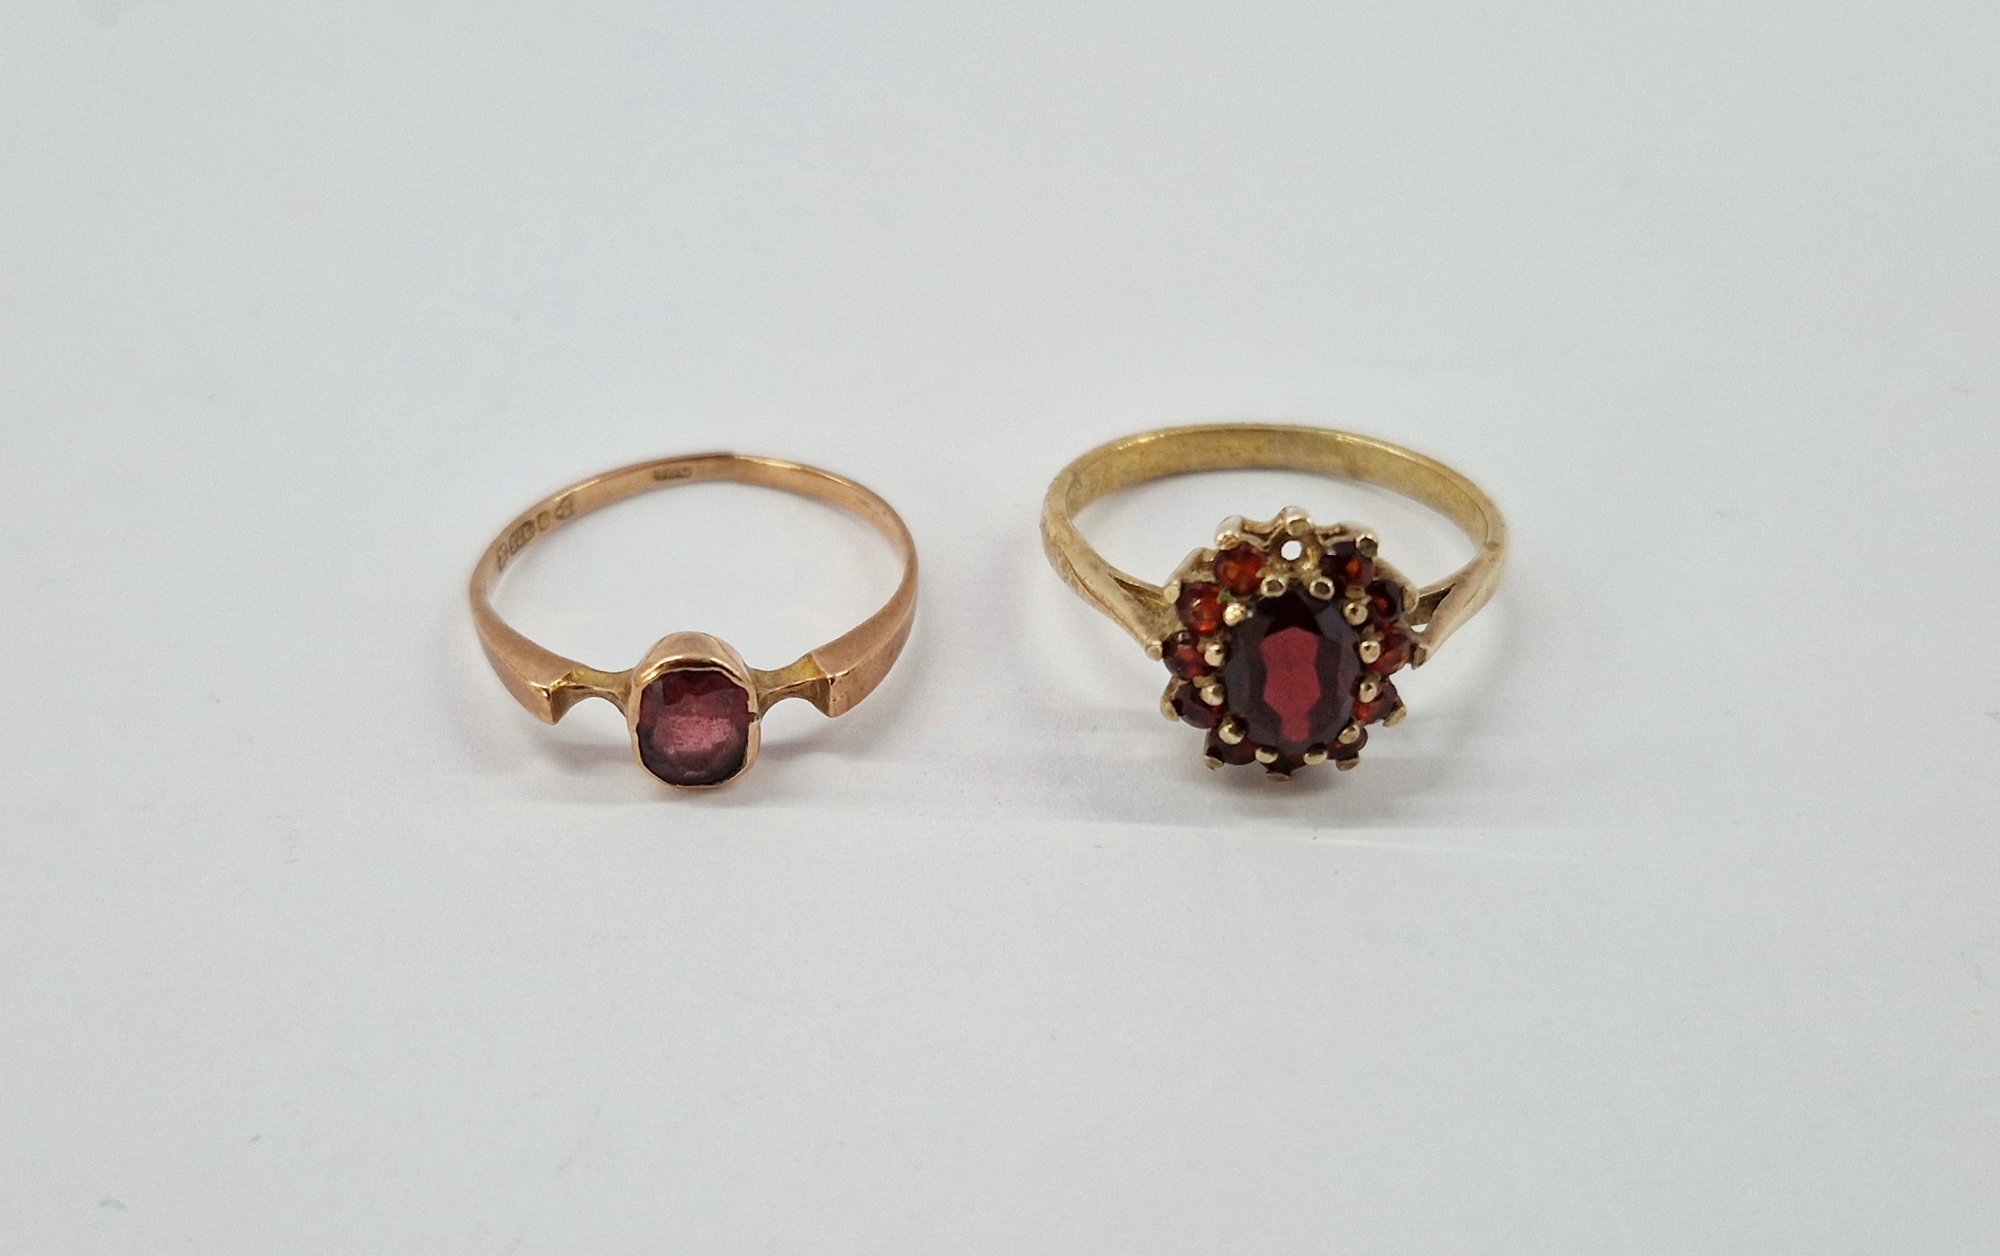 9ct gold and single stone garnet ring, 1g approx., and a silver-gilt garnet cluster ring both size M